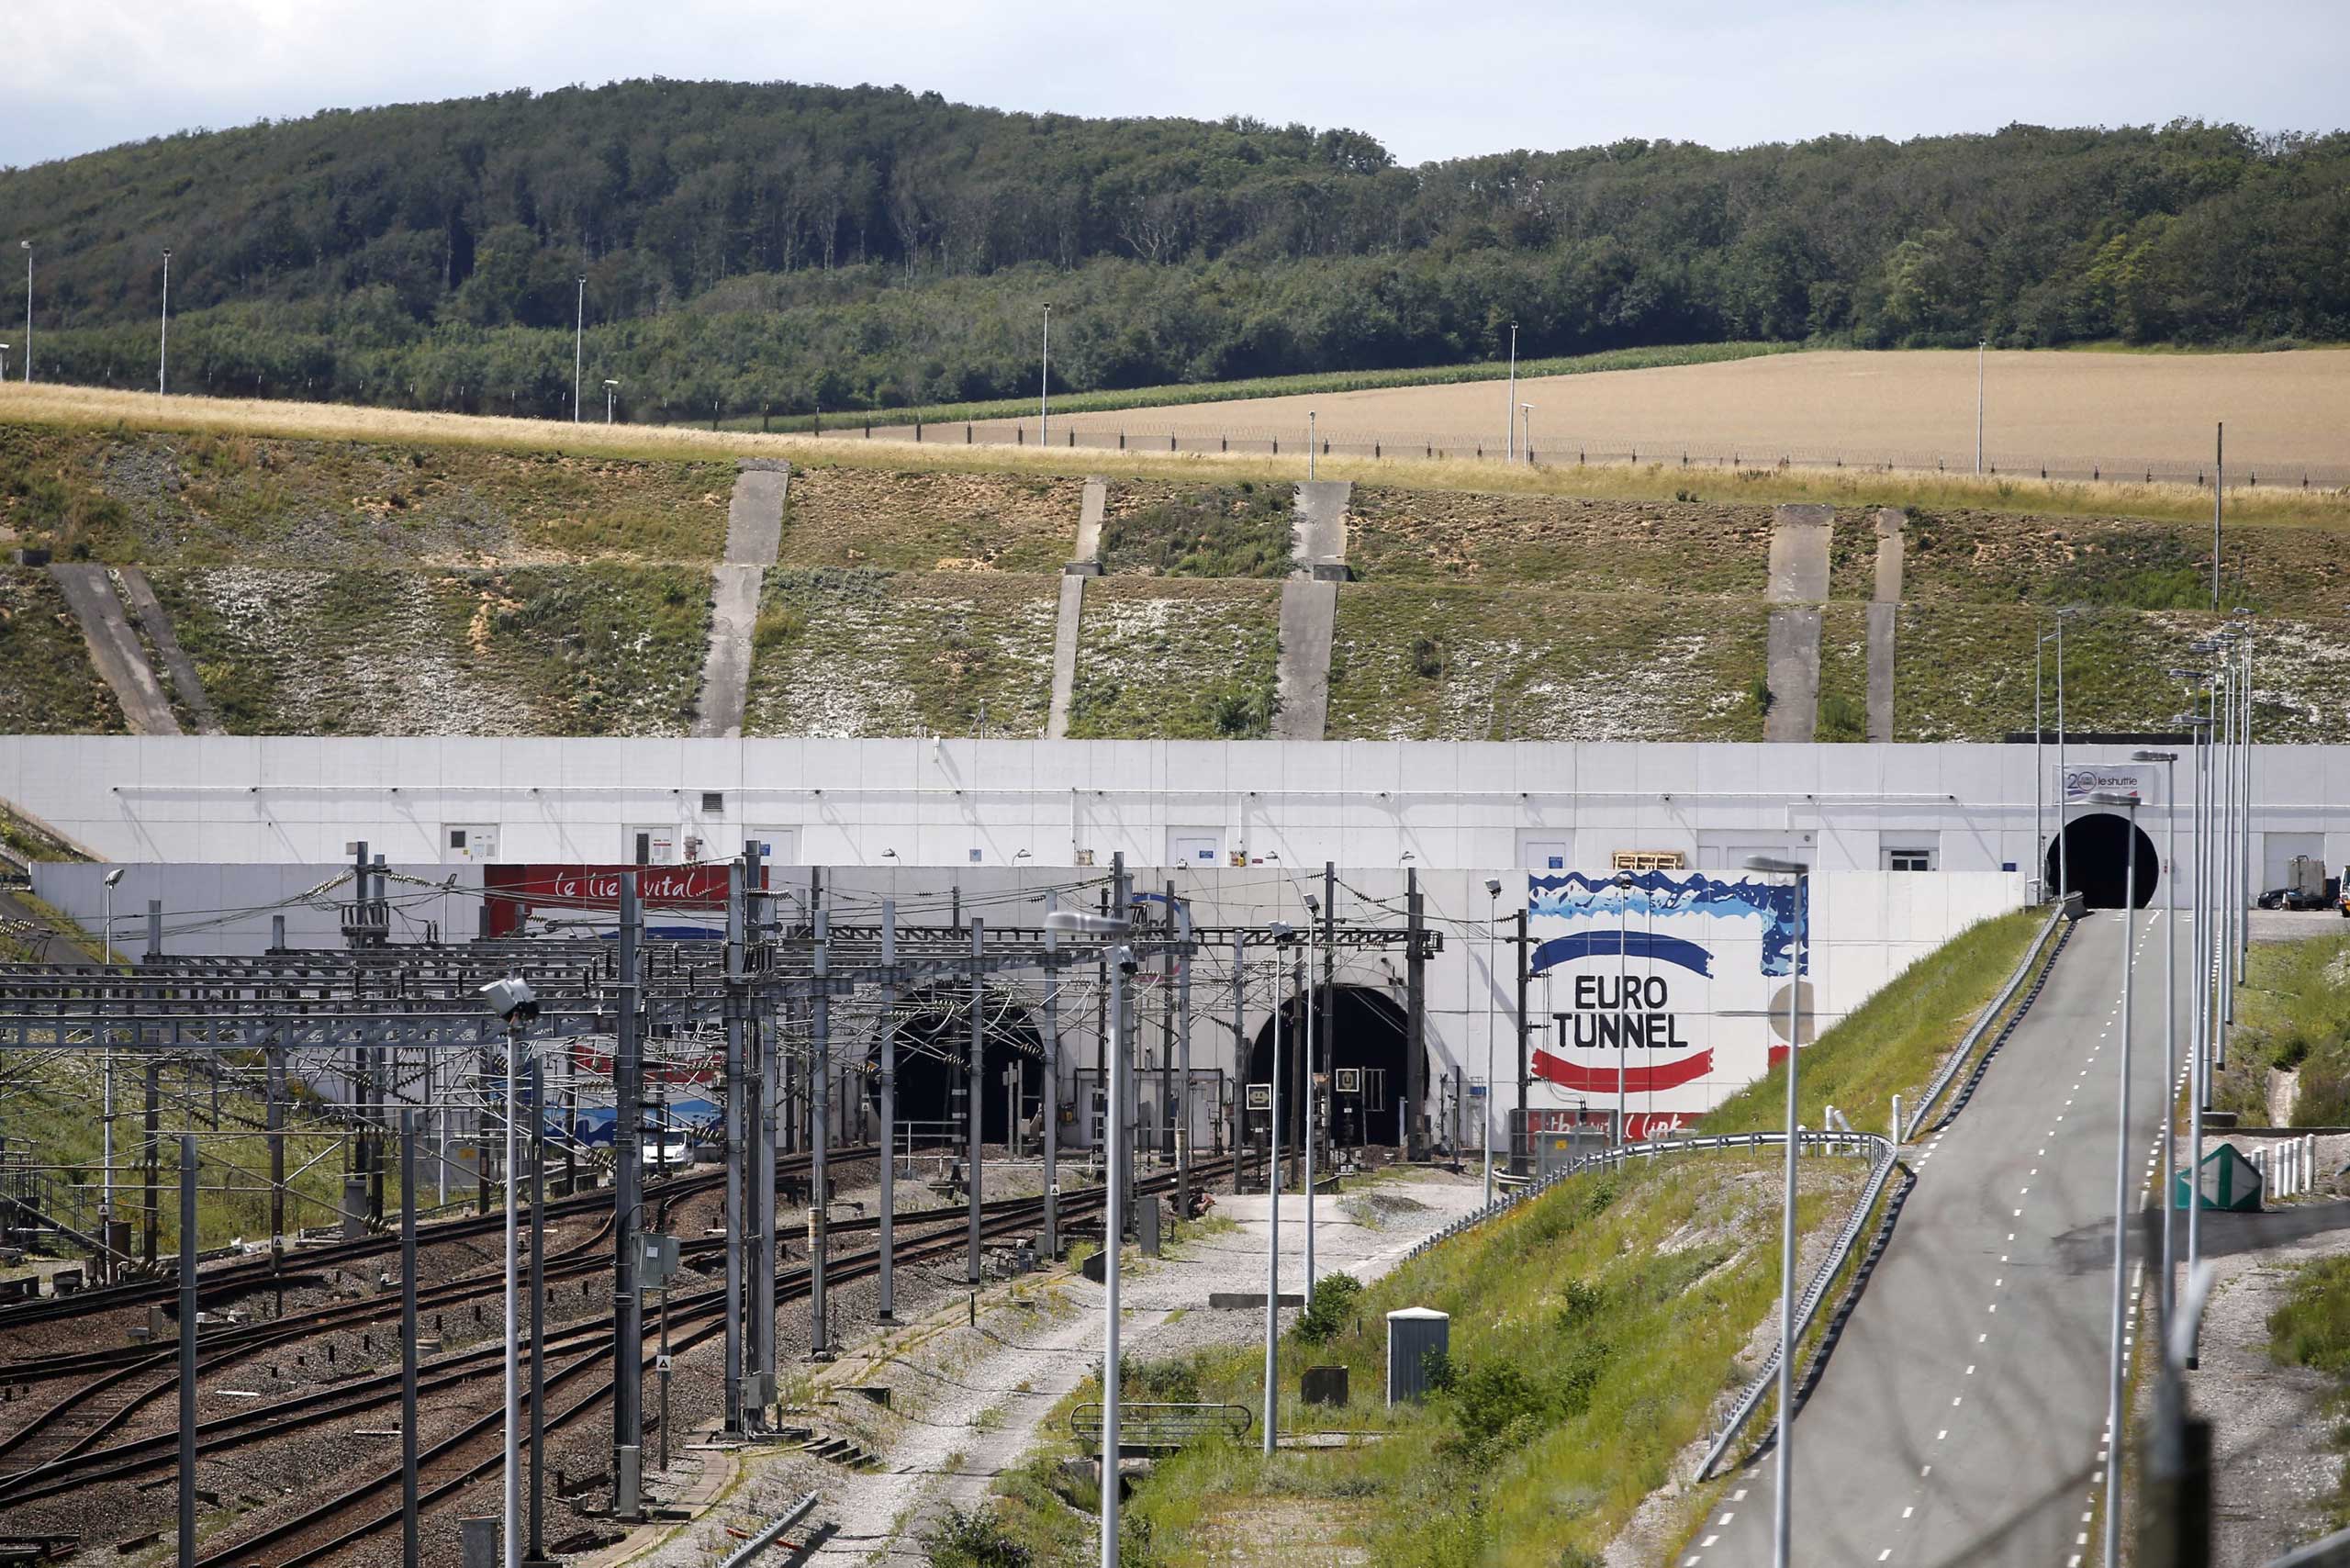 A general view of the Eurotunnel train tracks at the entrance of the channel tunnel in Coquelles, near Calais, France, on  July 29, 2015.